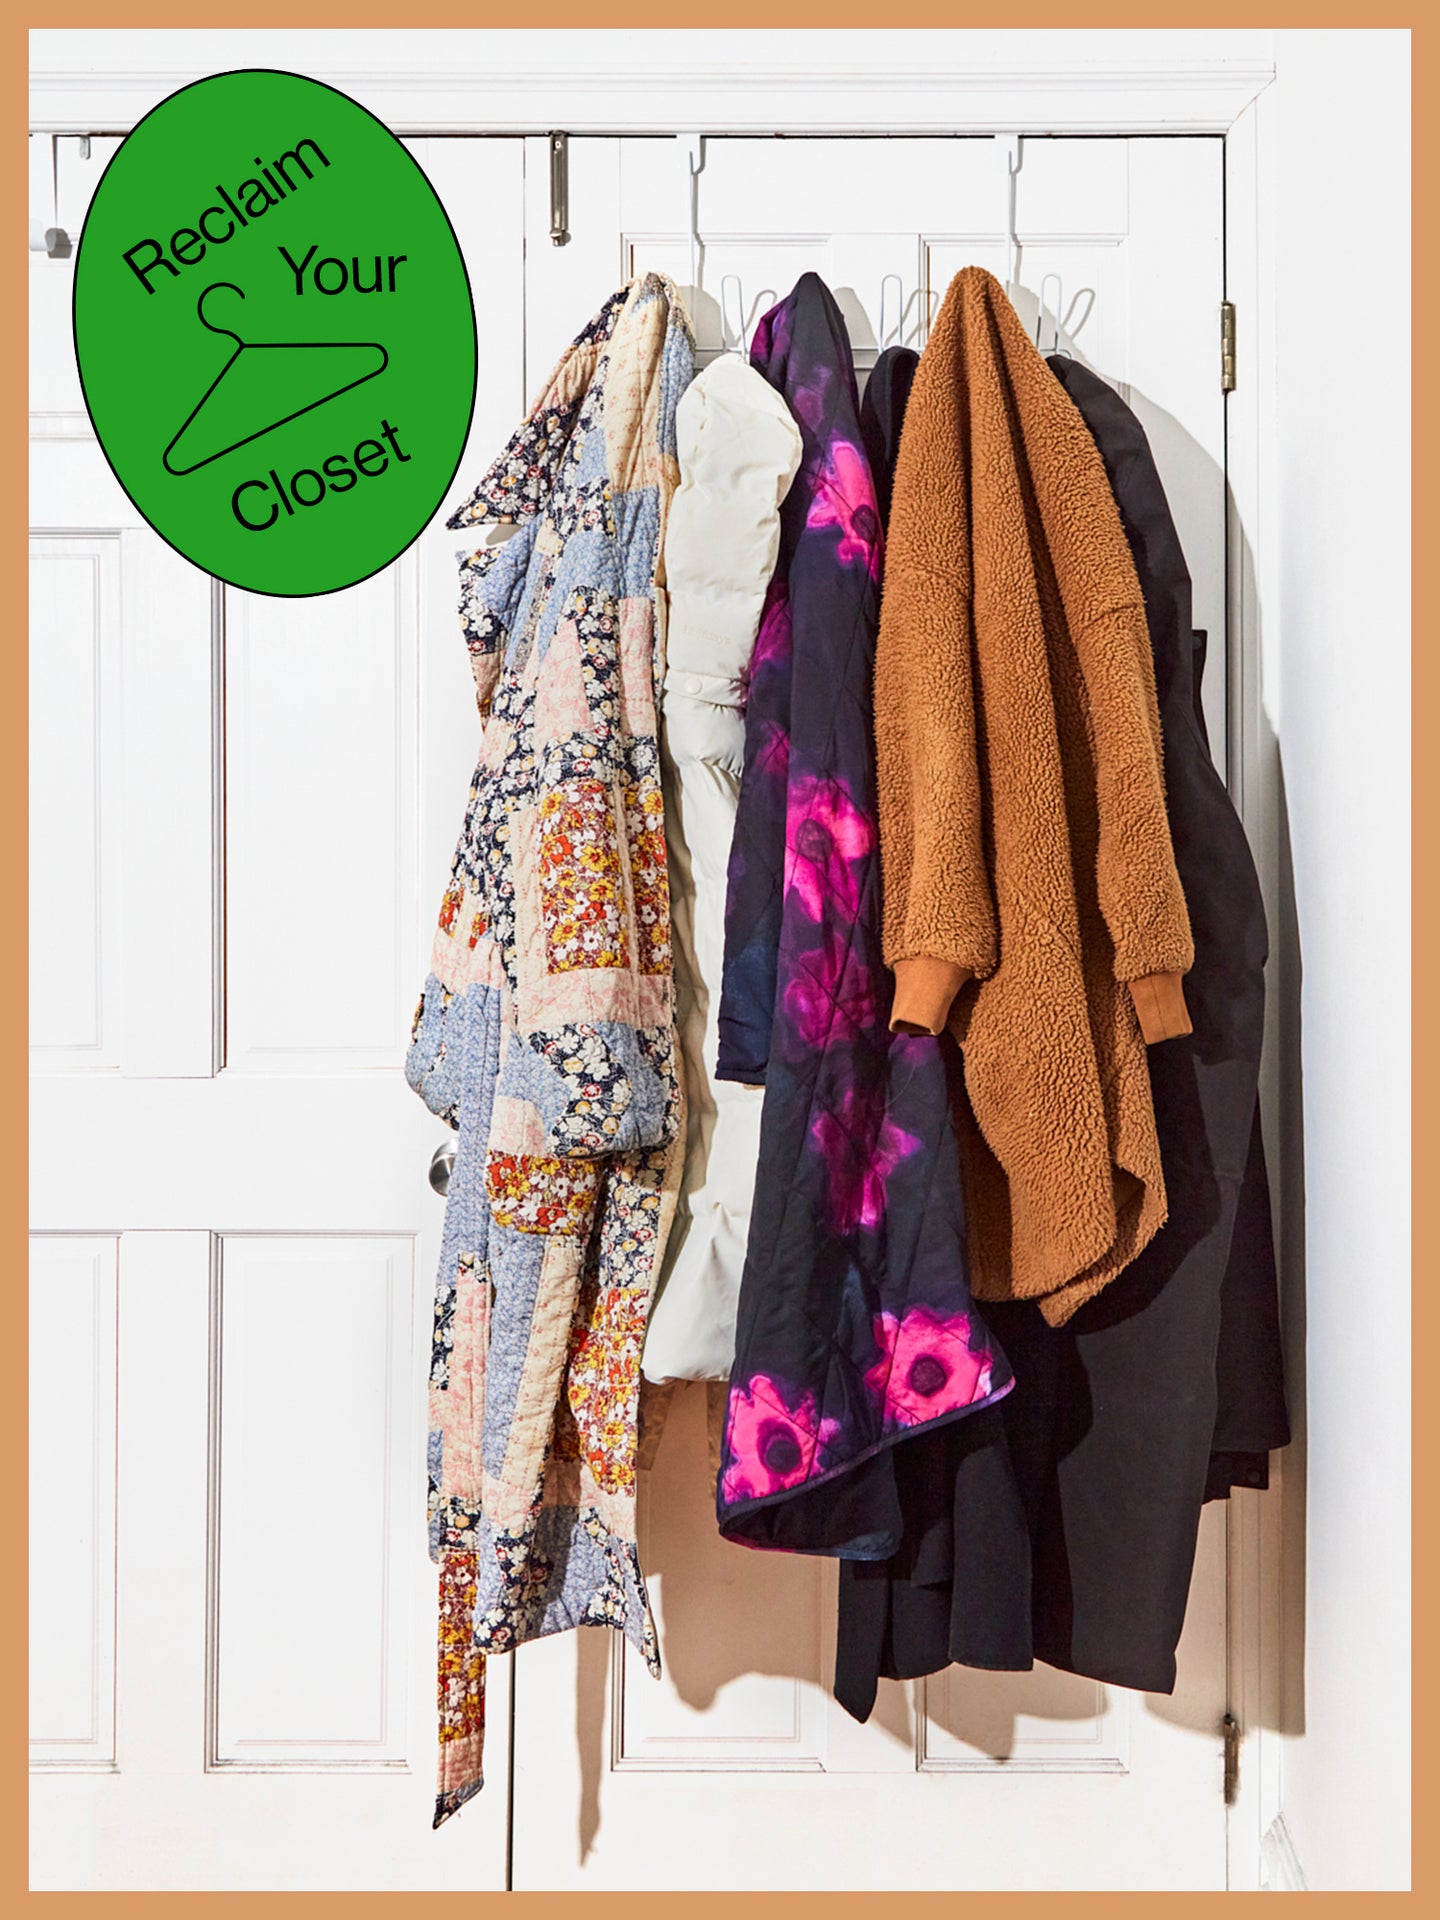 Coats hanging on the back of a door with a sticker that says "Reclaim Your Closet"